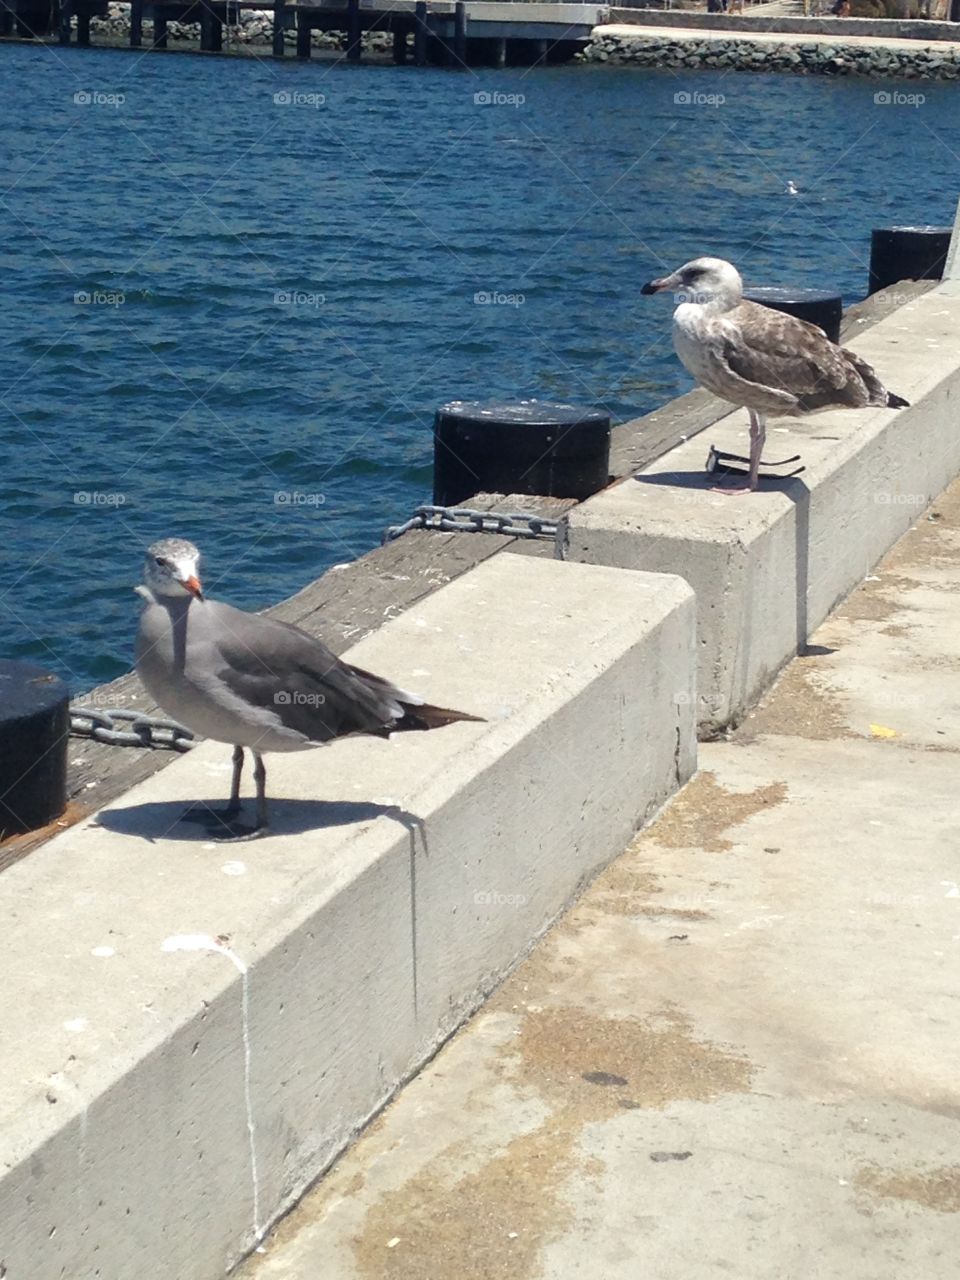 Two seagulls at the pier